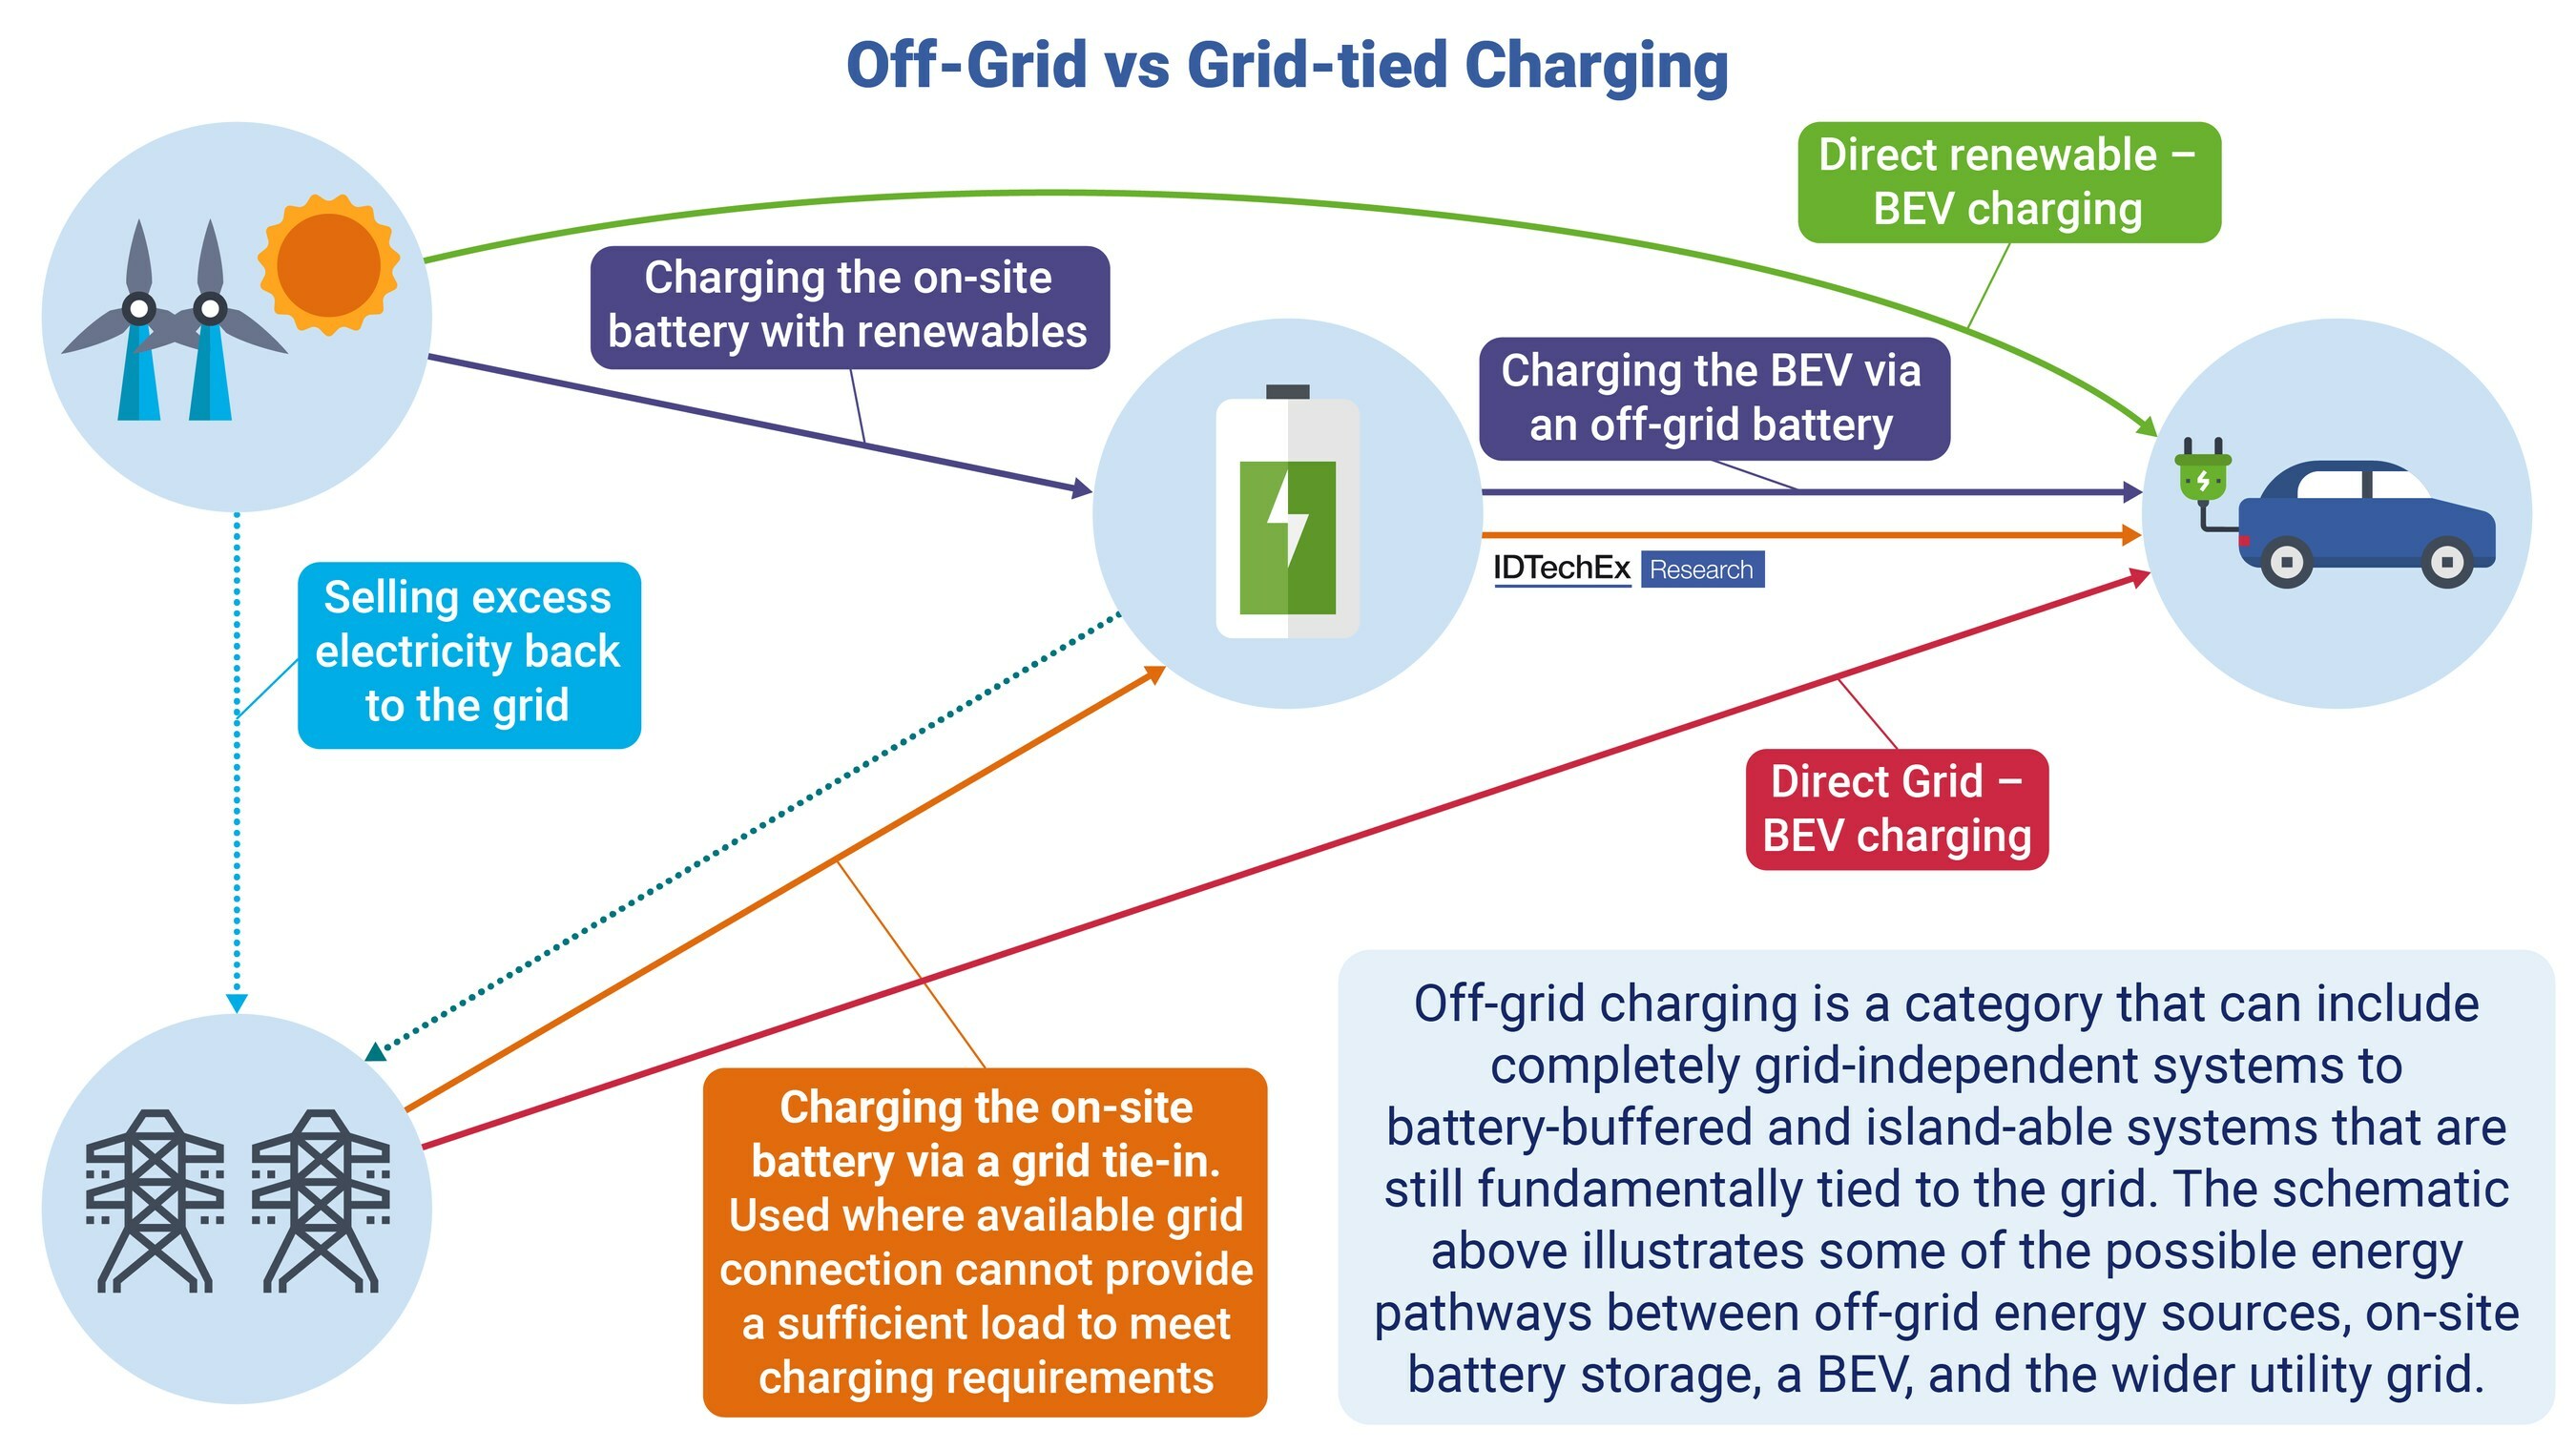 Overview of the different energy pathways for off-grid/grid-tied and a hybrid grid solution. Source: IDTechEx